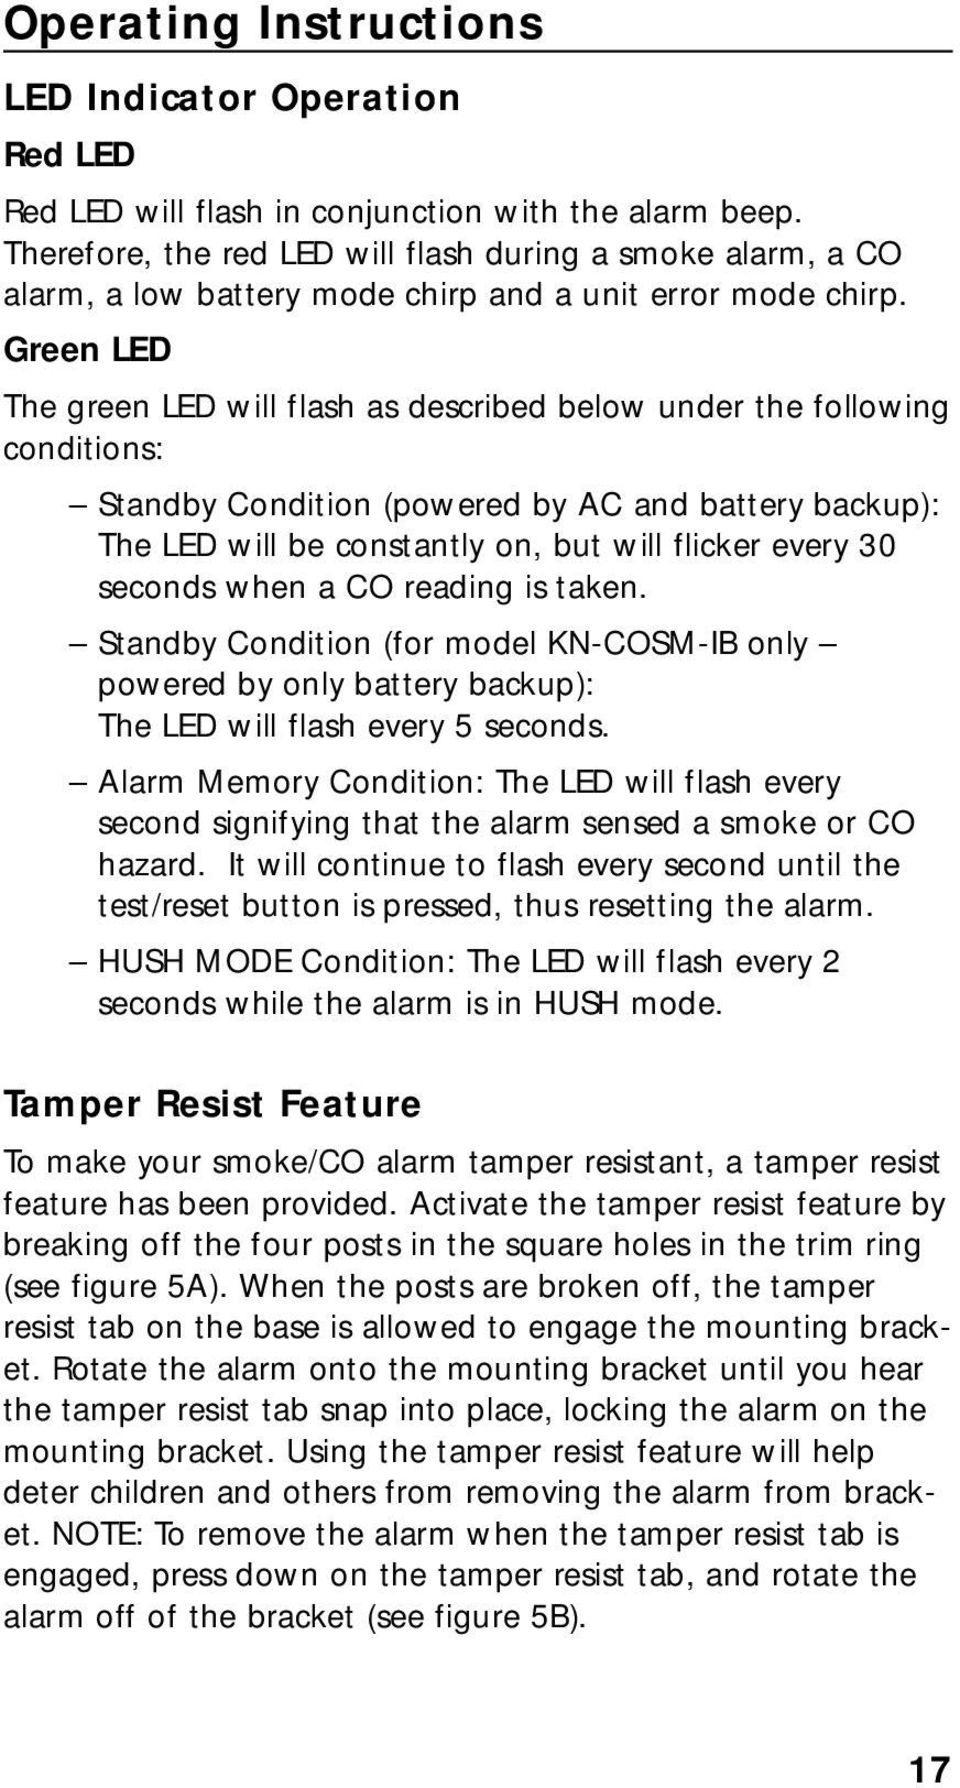 Green LED The green LED will flash as described below under the following conditions: Standby Condition (powered by AC and battery backup): The LED will be constantly on, but will flicker every 30